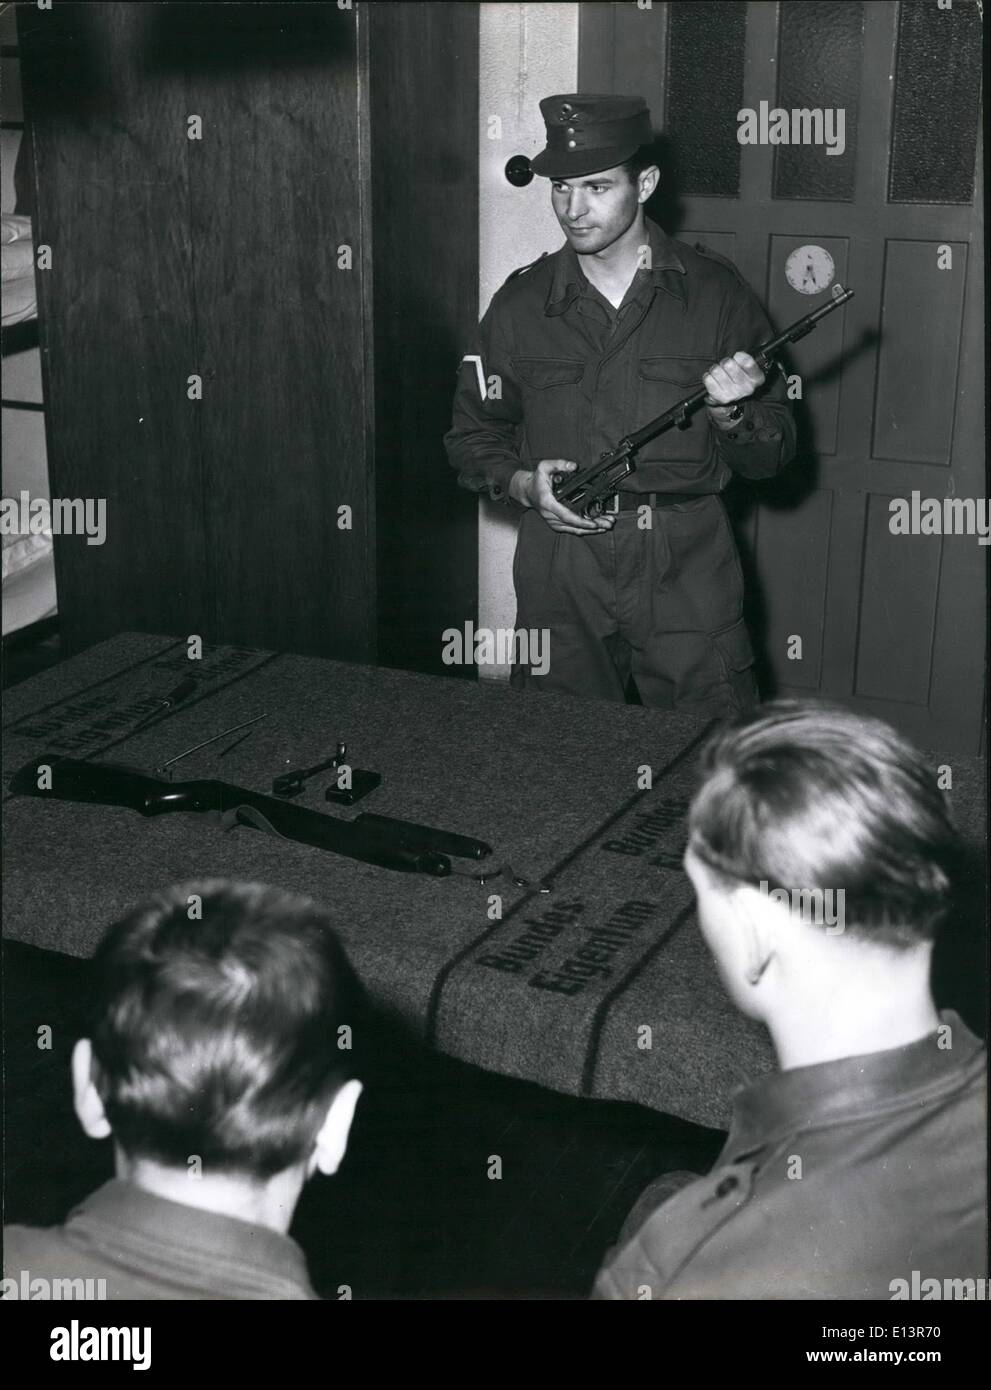 Mar. 22, 2012 - Germany's first post war draftees: Gun-practice with an American rifle. Stock Photo